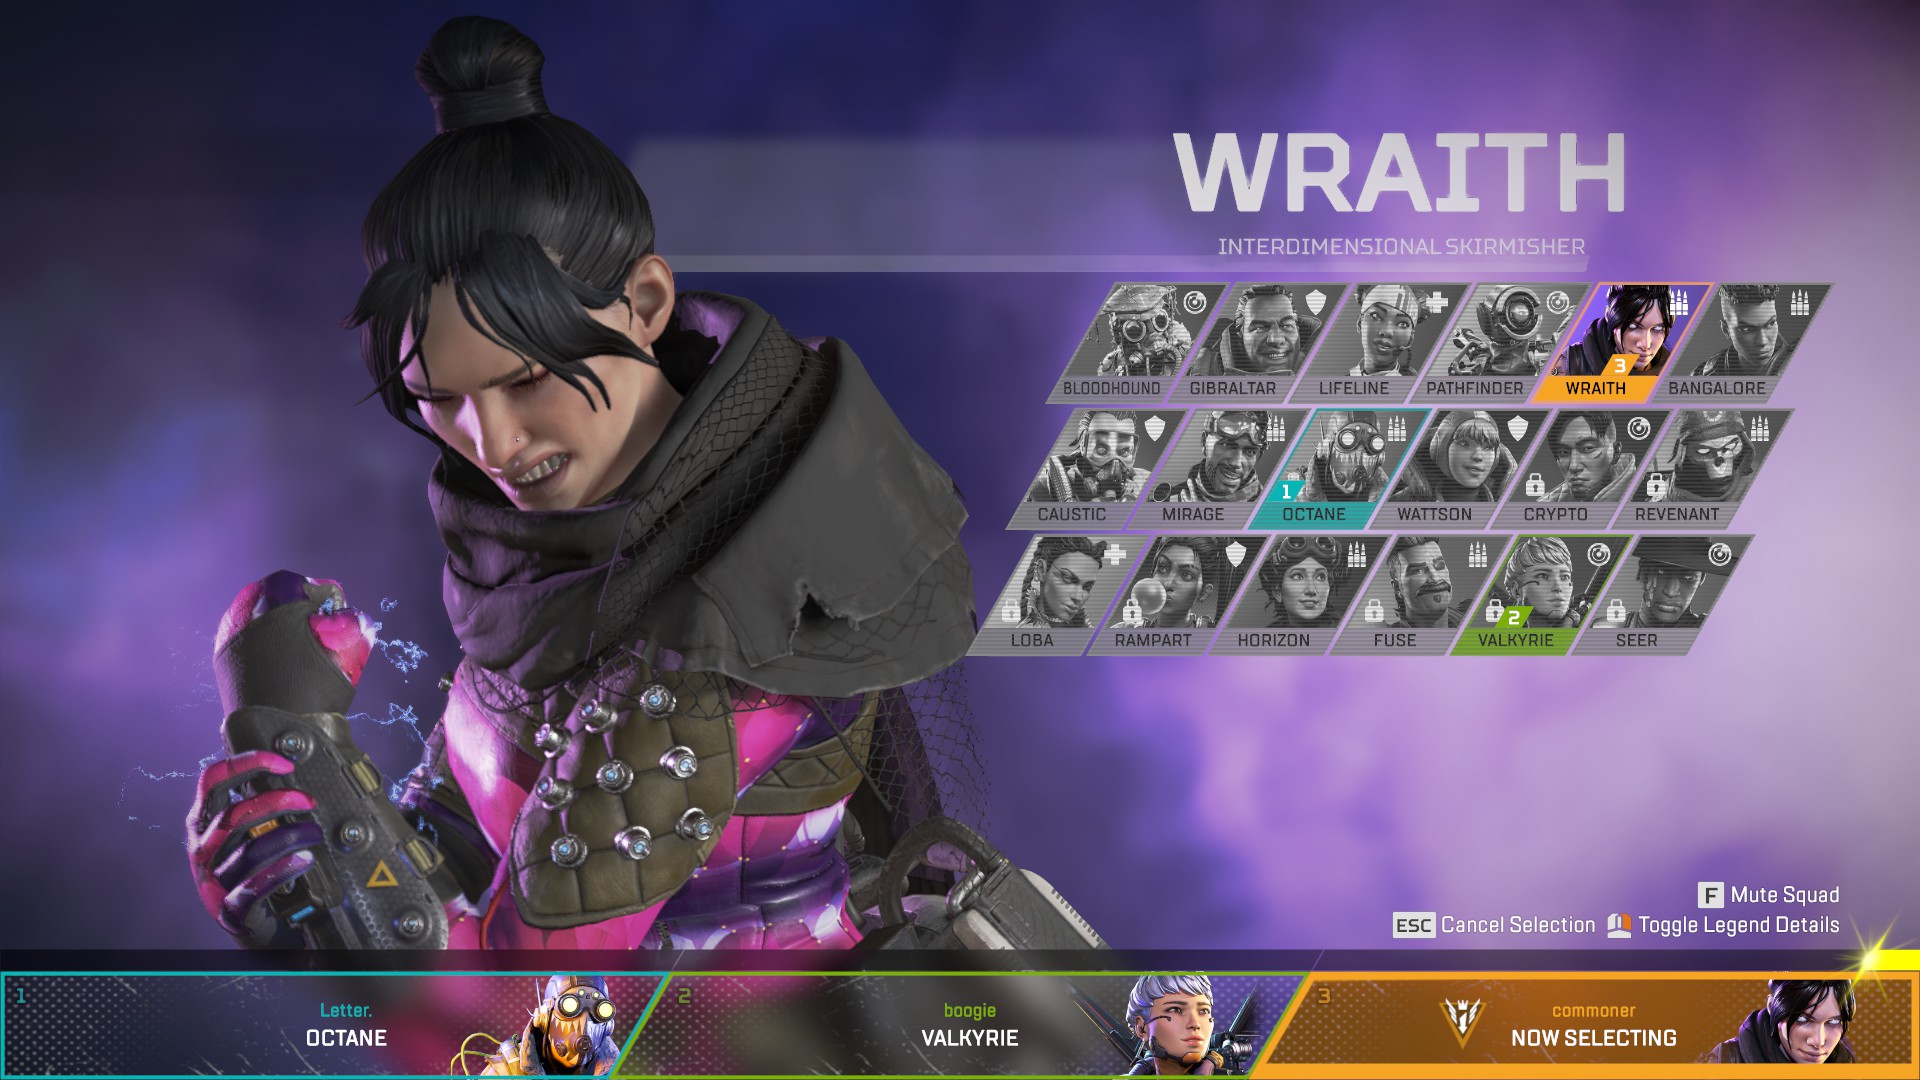 How to Play Wraith in Apex Legends